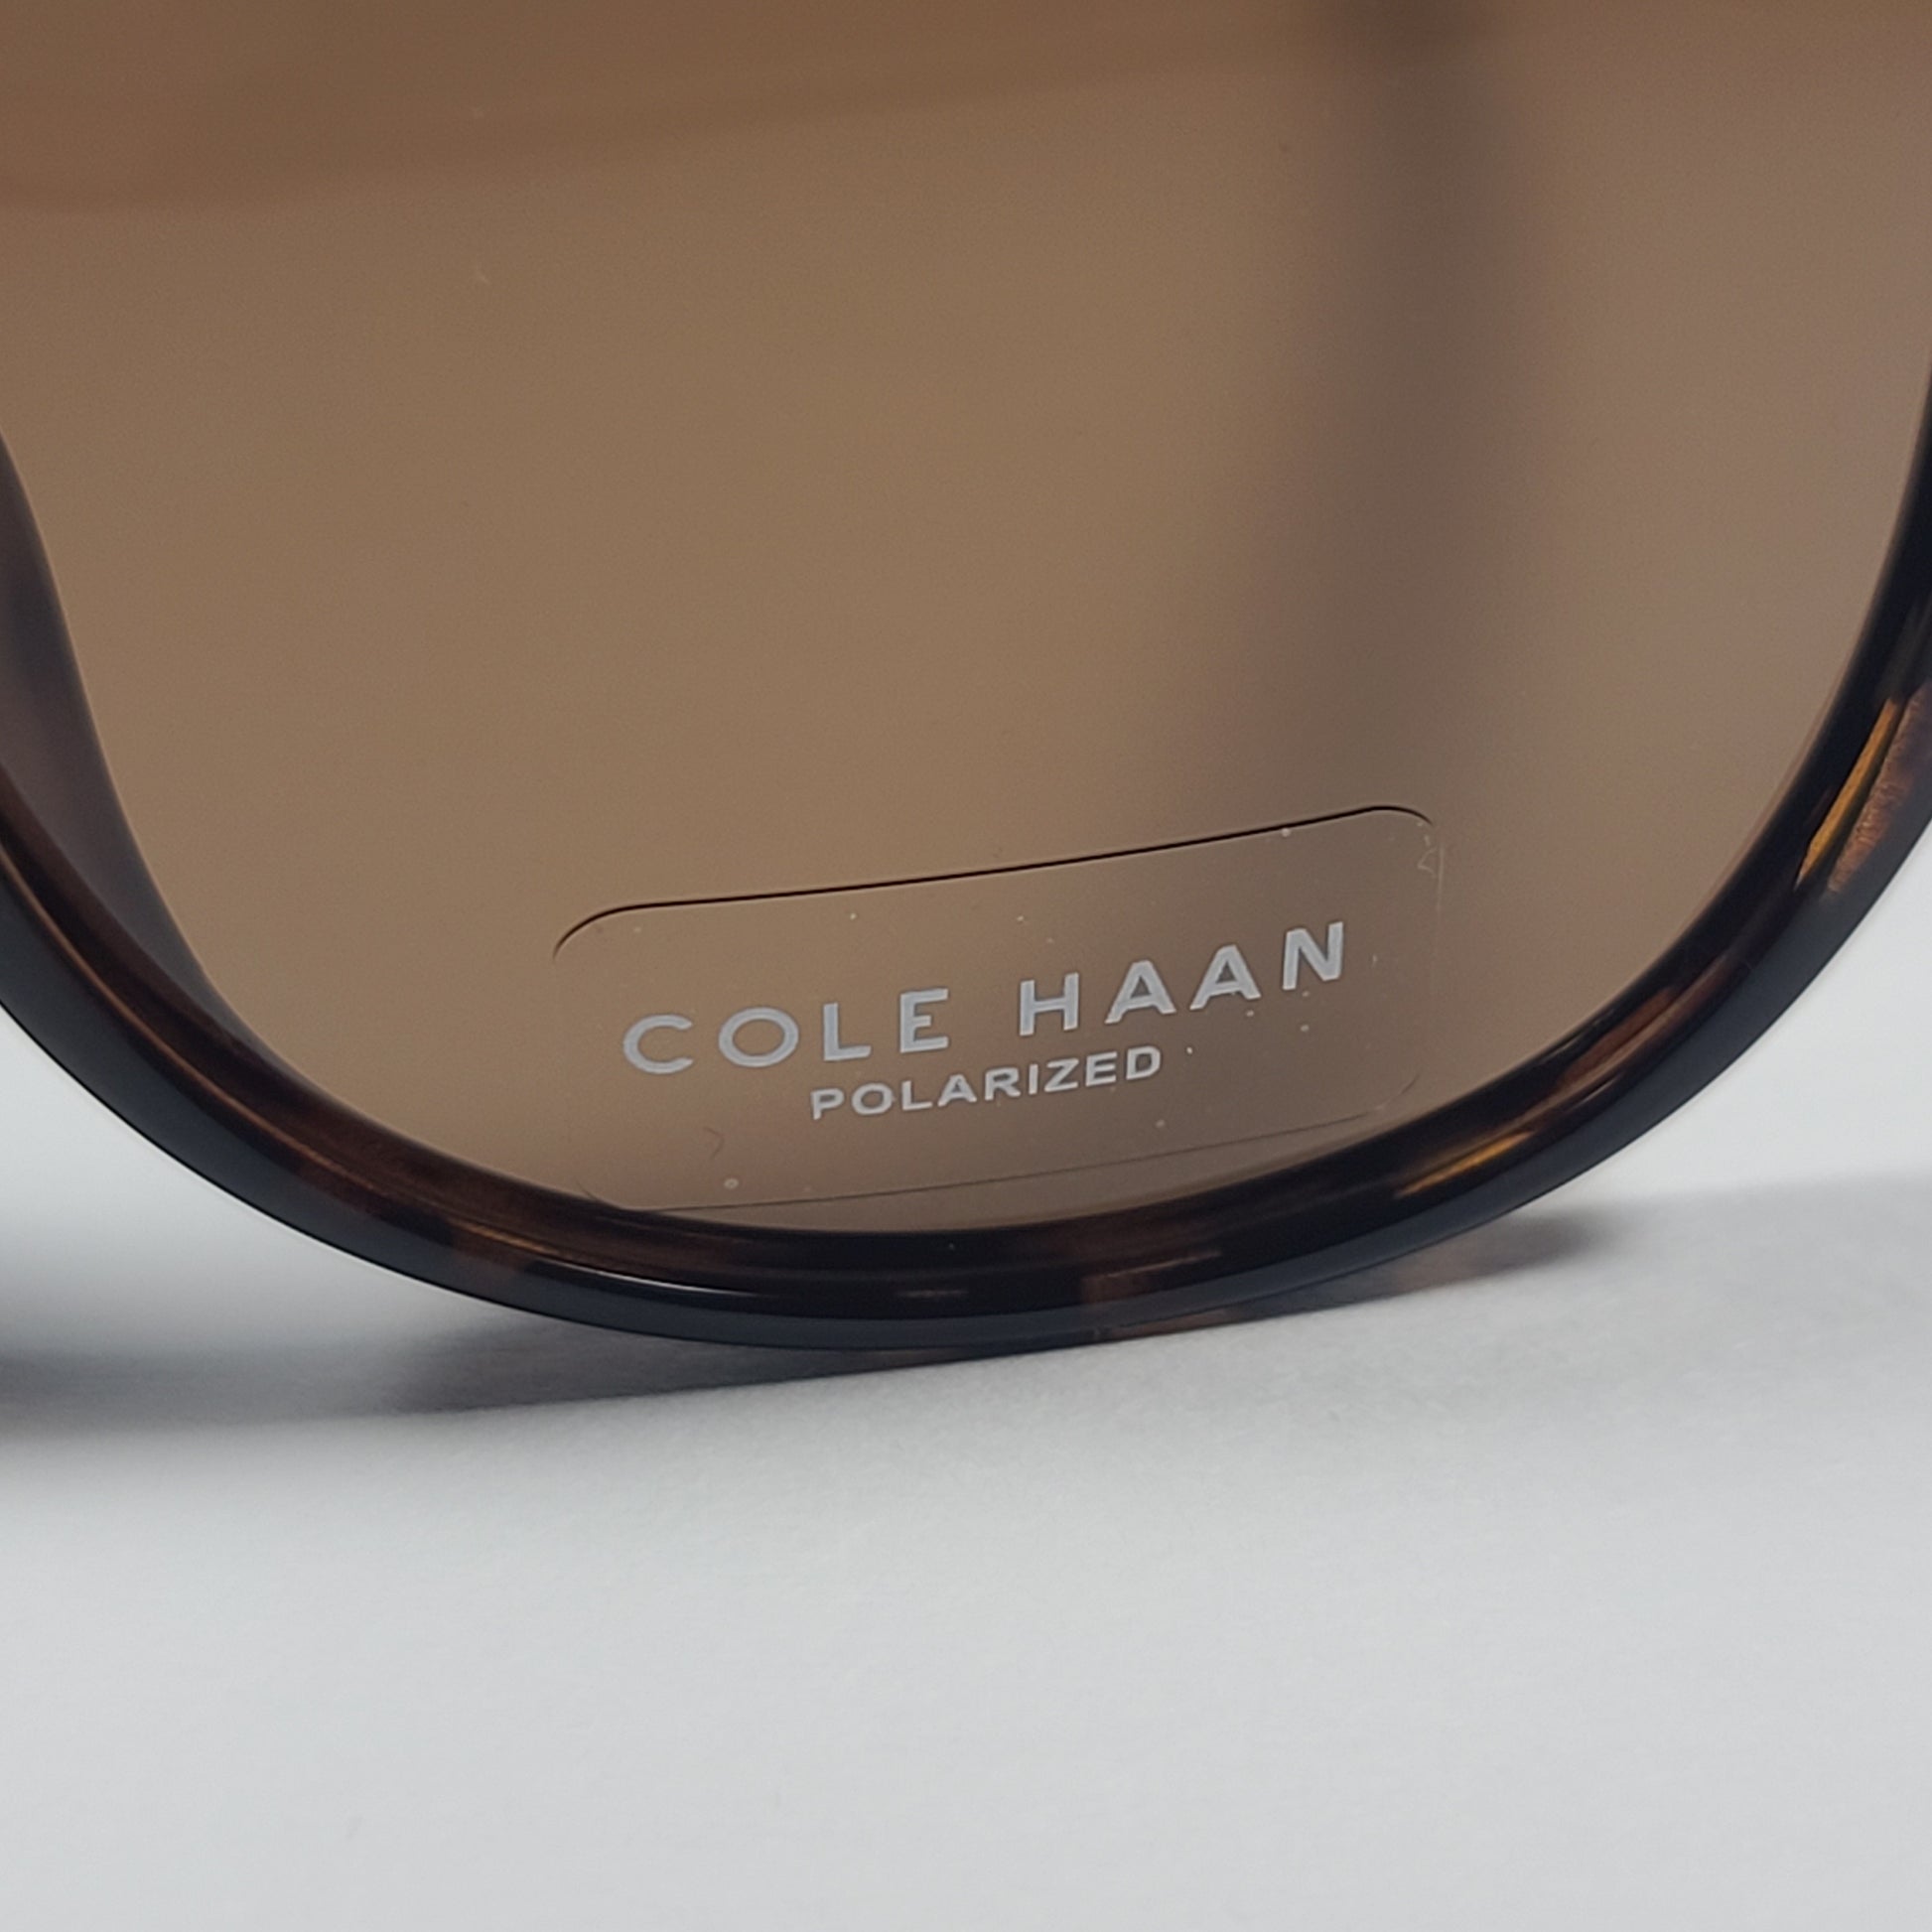 Cole Haan CH9024 215 TORTOISE Soft Round Polarized Sunglasses Brown Tortoise Frame Brown Lens - Sunglasses